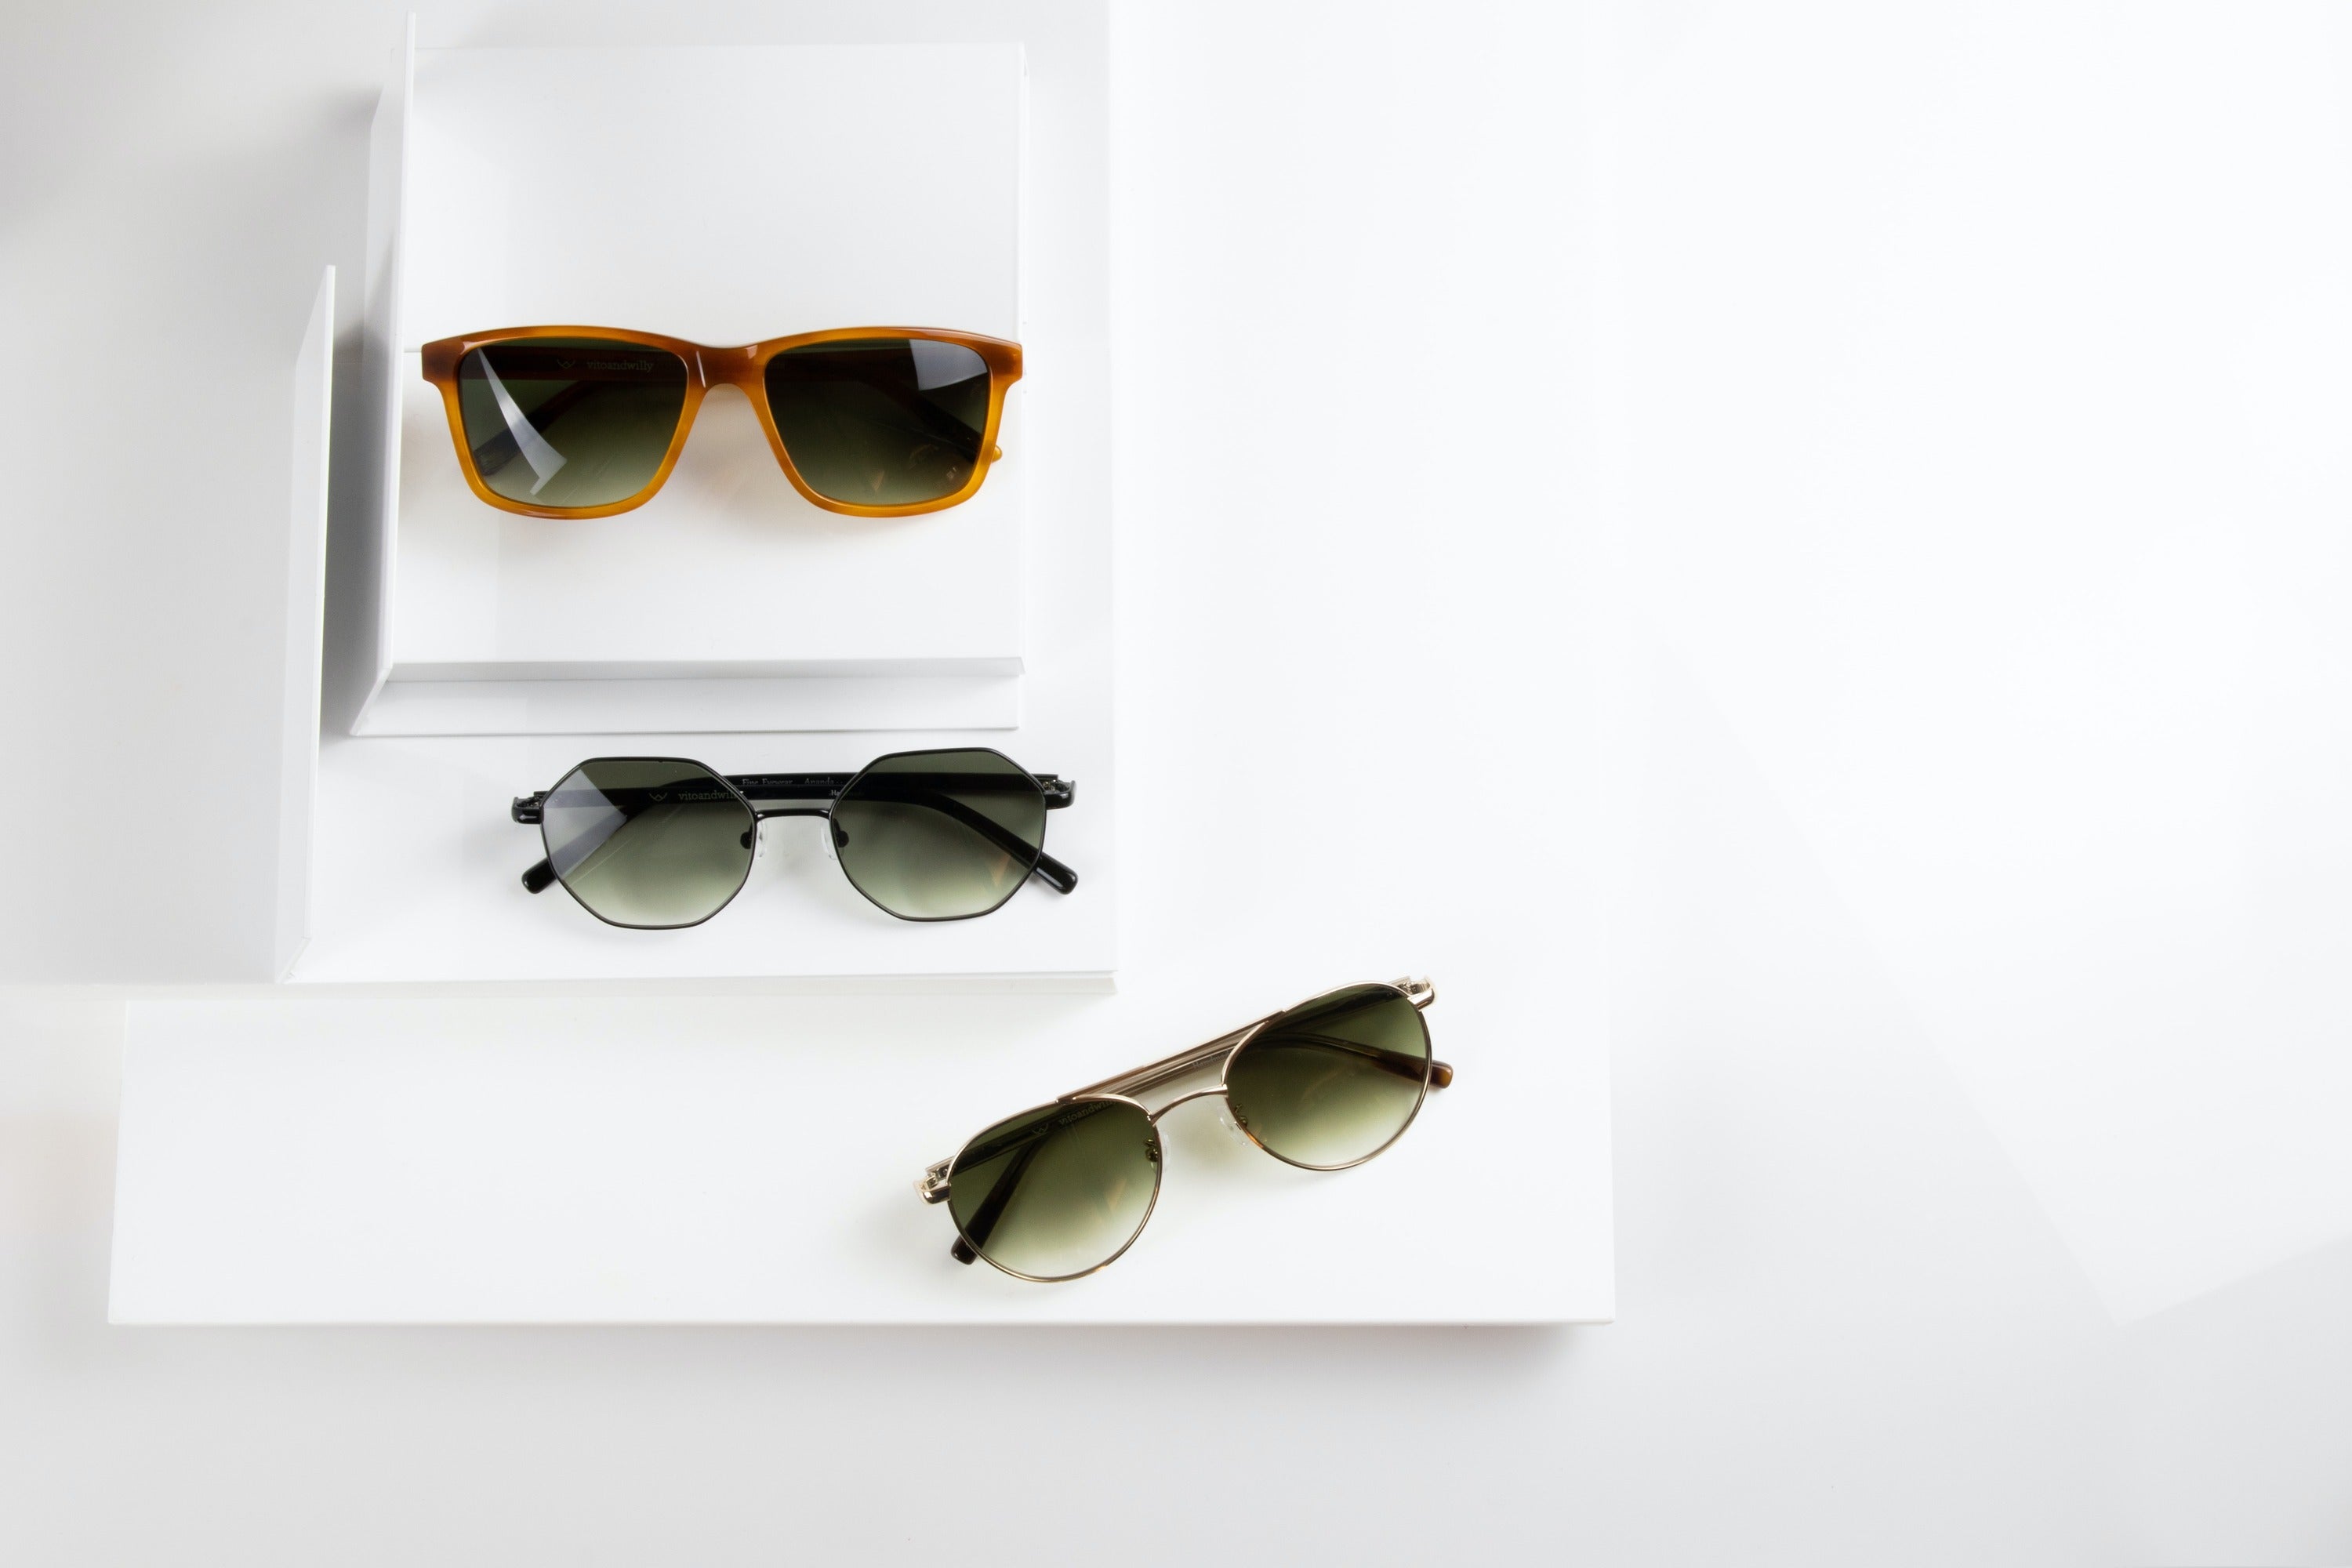 How to Wear Sunglasses: A Style Guide